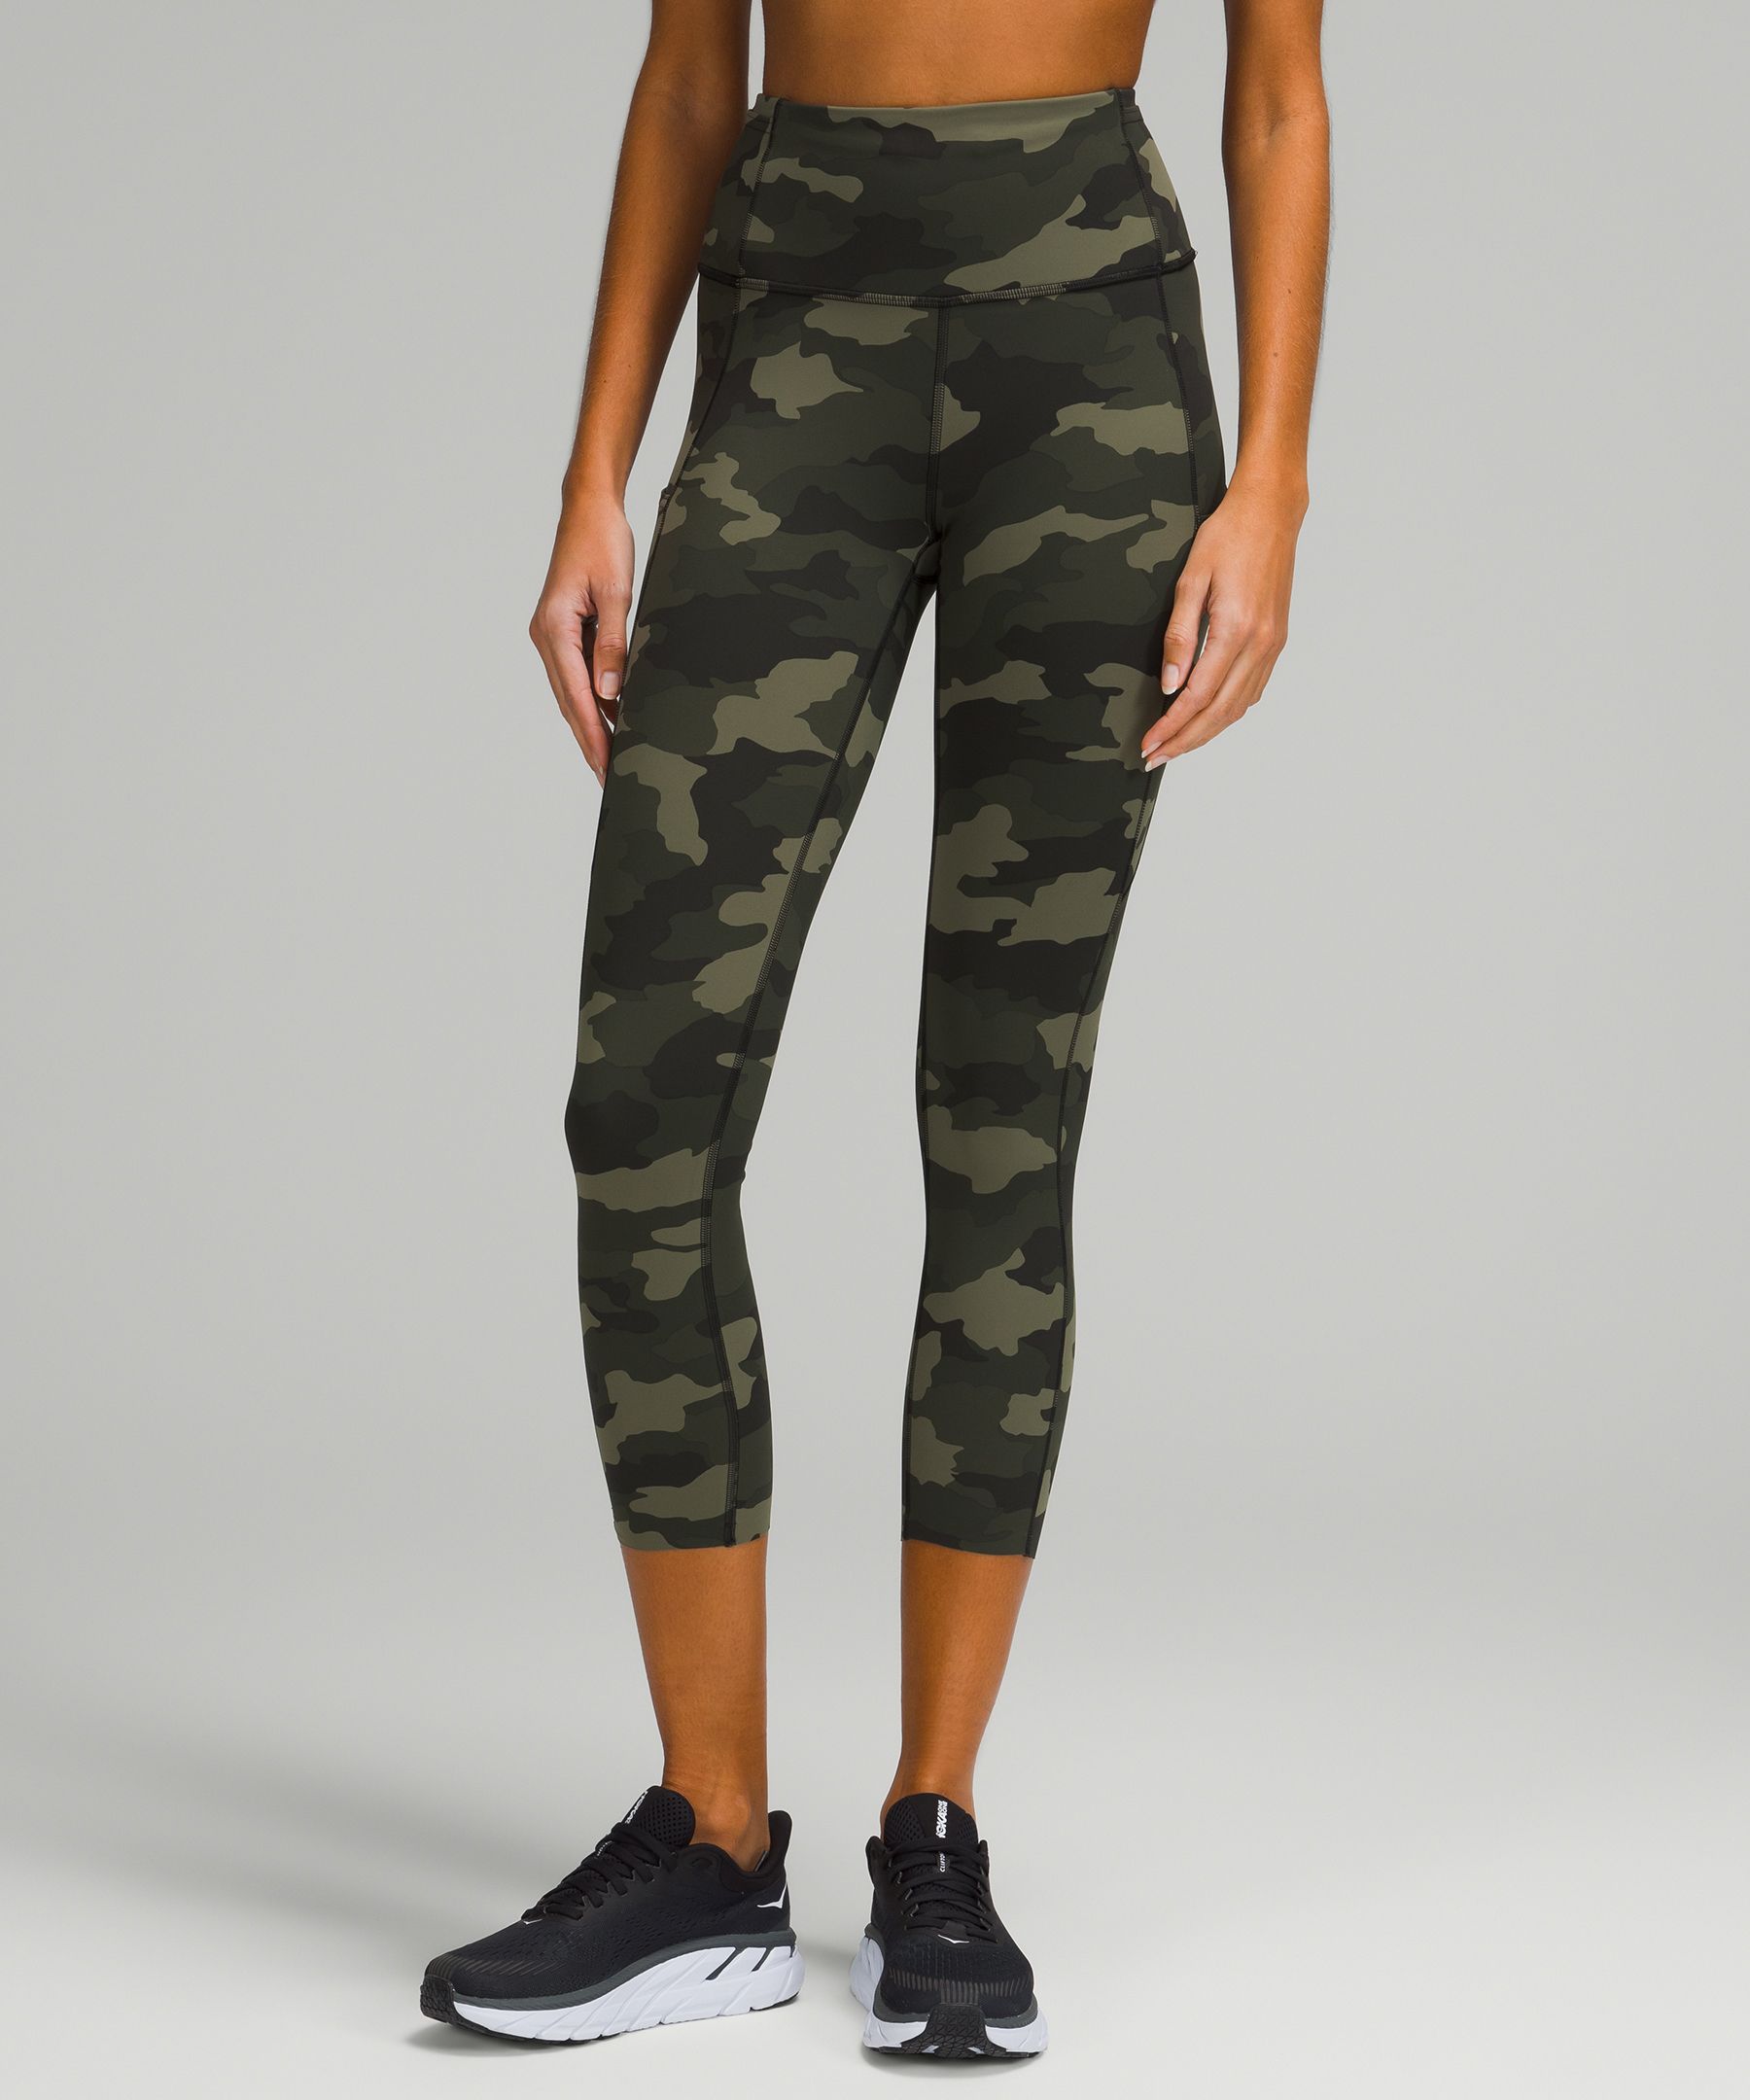 Lululemon Fast and Free High-Rise Crop 23 *Non-Reflective